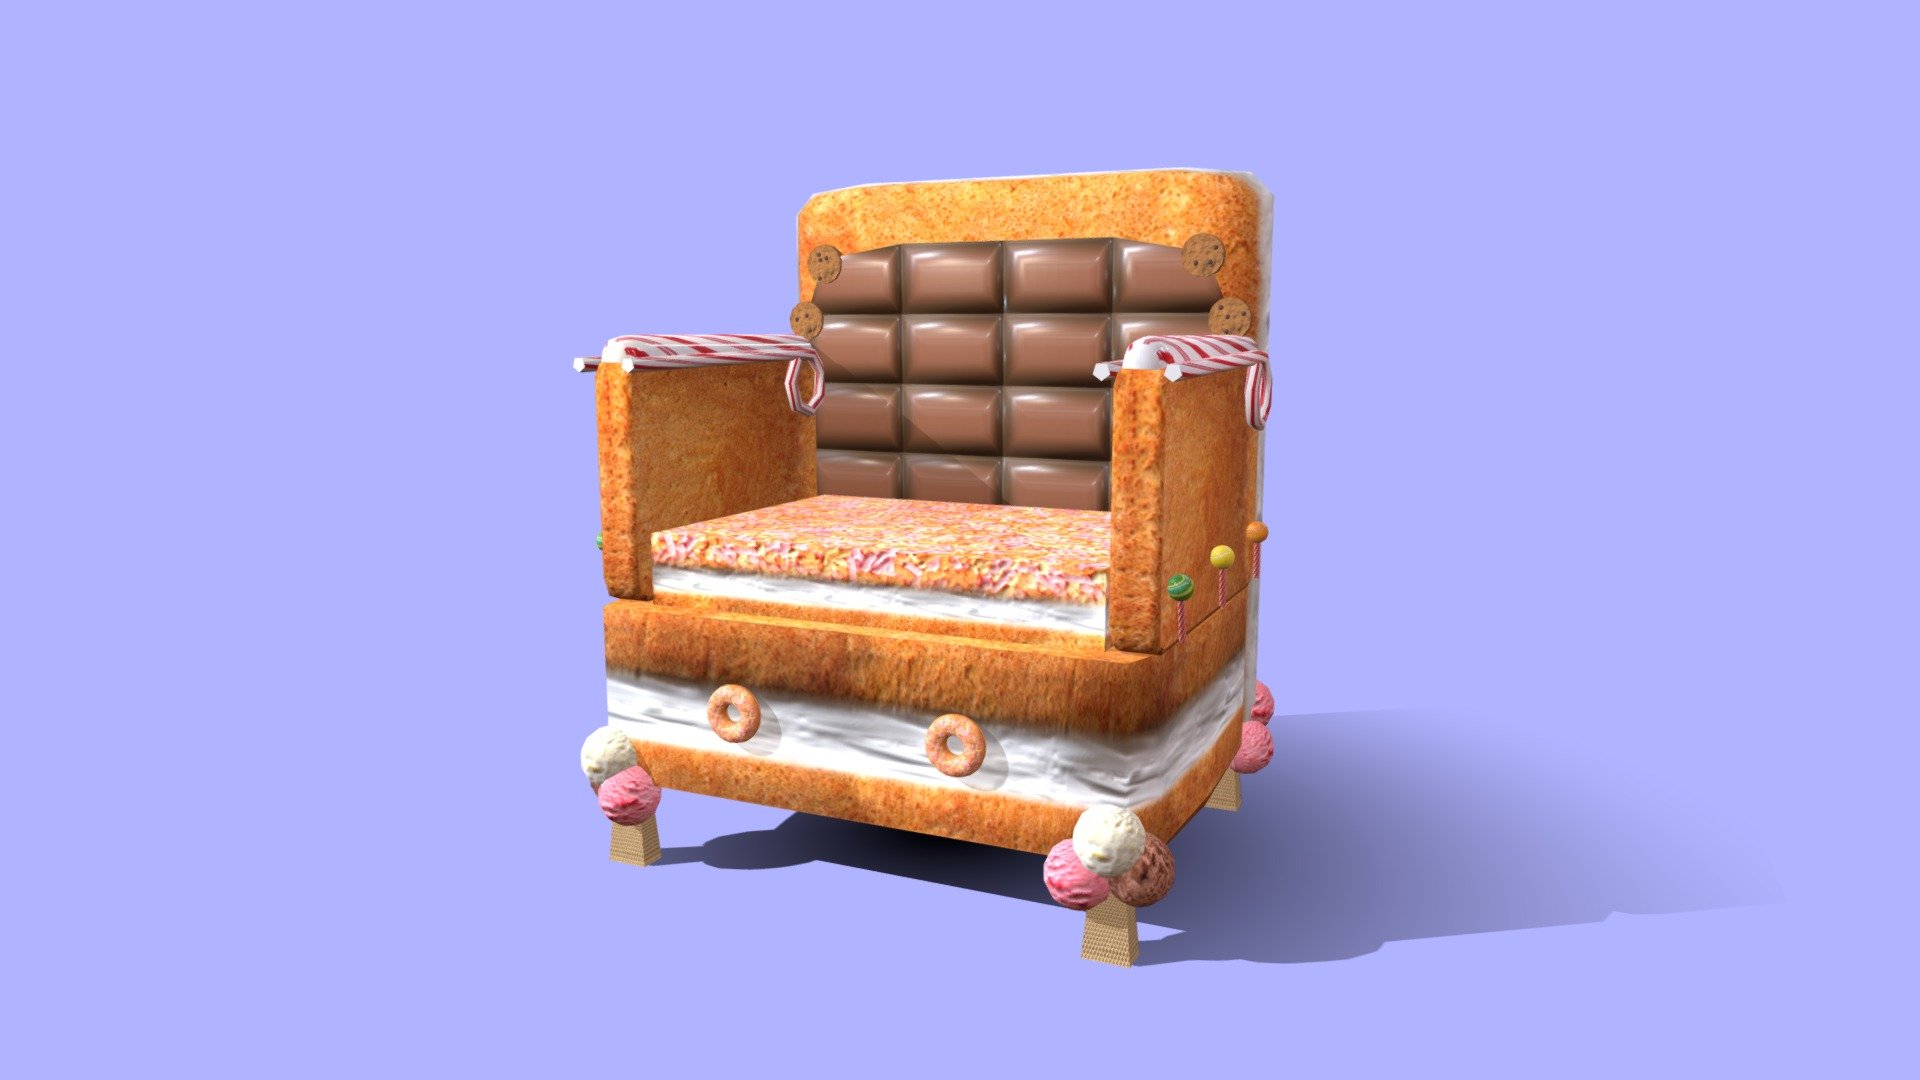 A Delicious Chair made for a school project.
Sitting at your own risk, the chair may be sticky.

Model: Melanie Neuber
Texture: Niklas Reincke - Candy Armchair - 3D model by Niklas Reincke (@kleinesboss) 3d model